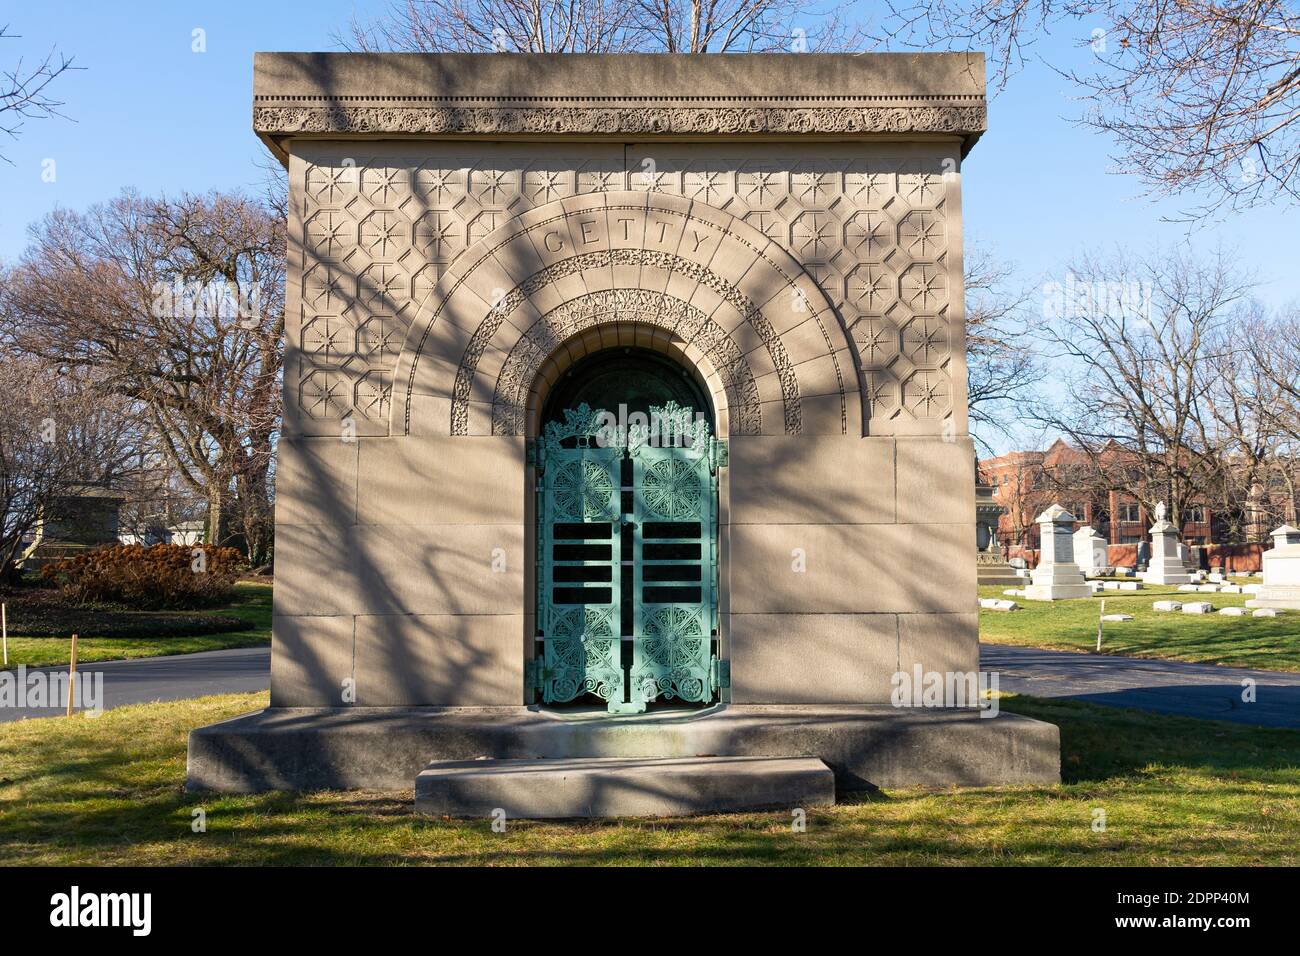 Chicago, Illinois / United States - December 9th, 2020: The Carrie Eliza Getty Tomb by architect Louis Sullivan in Graceland Cemetery. Stock Photo